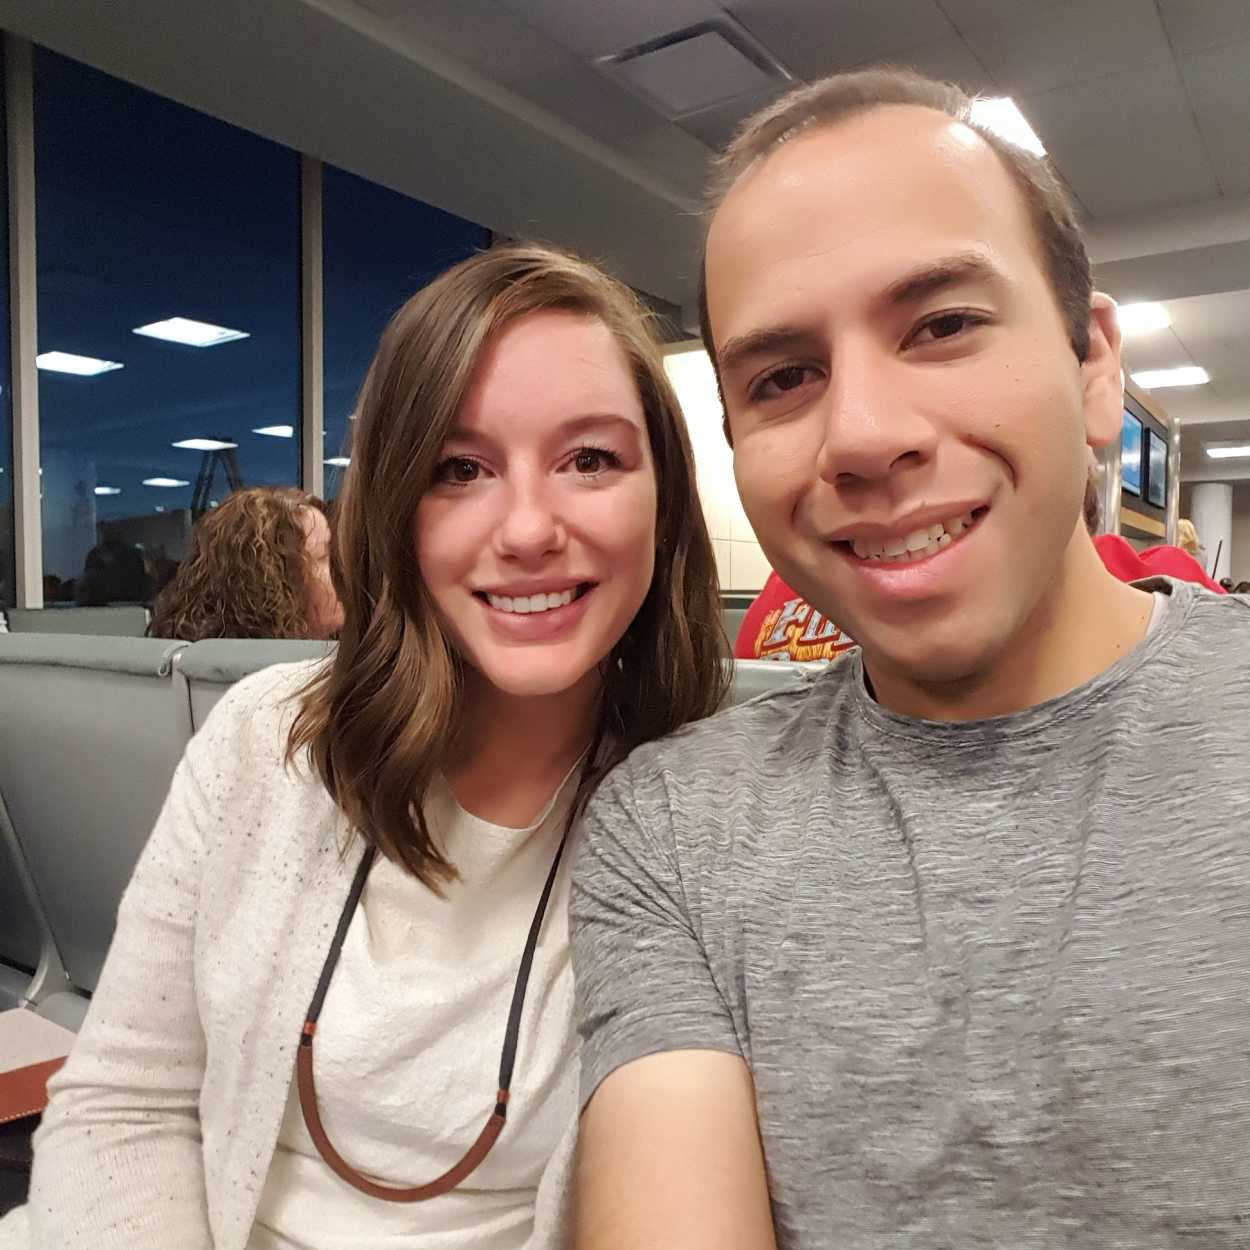 Alyssa and Michael at the airport